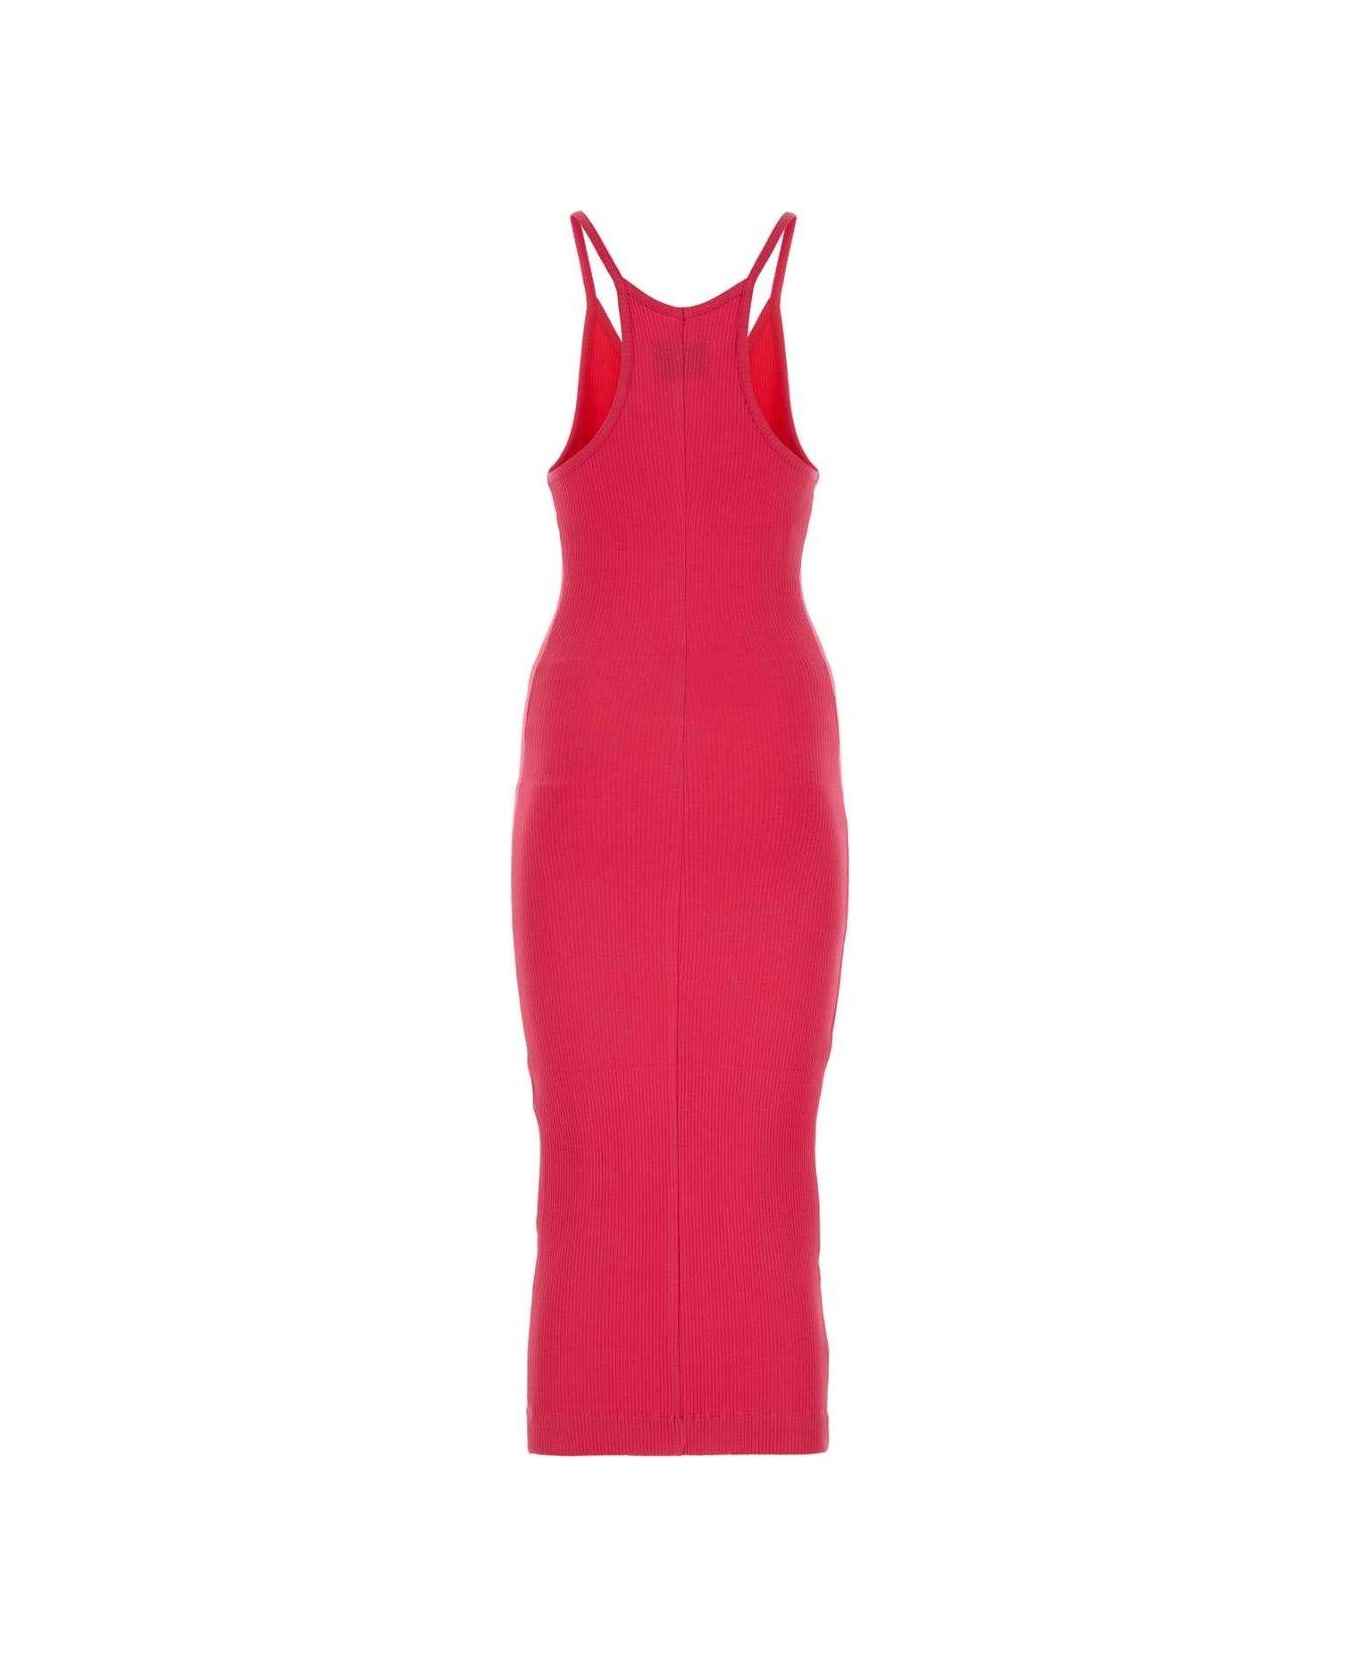 M05CH1N0 Jeans Jeans Logo Patch Sleeveless Ribbed Midi Dress - Pink